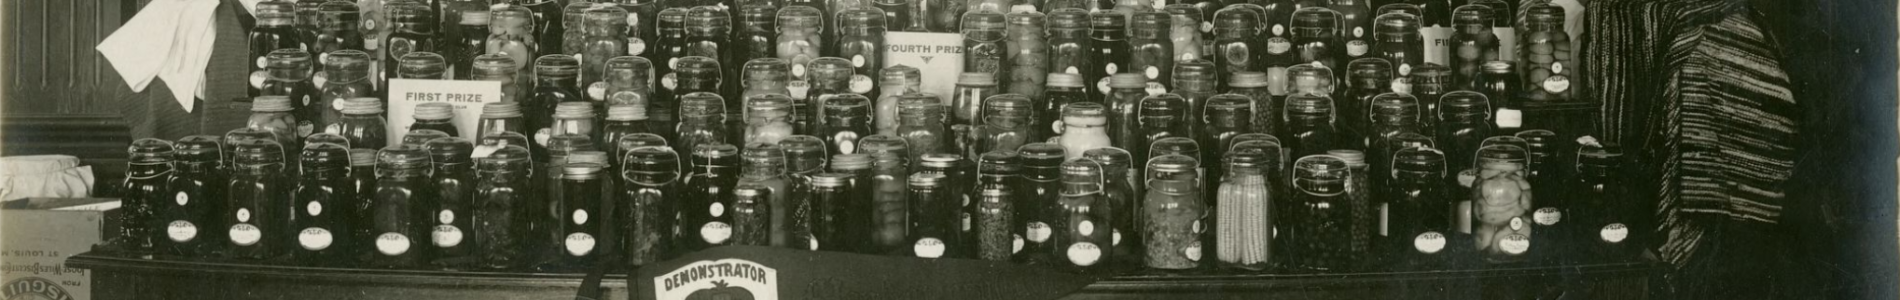 Black and white photograph of a display of canned goods